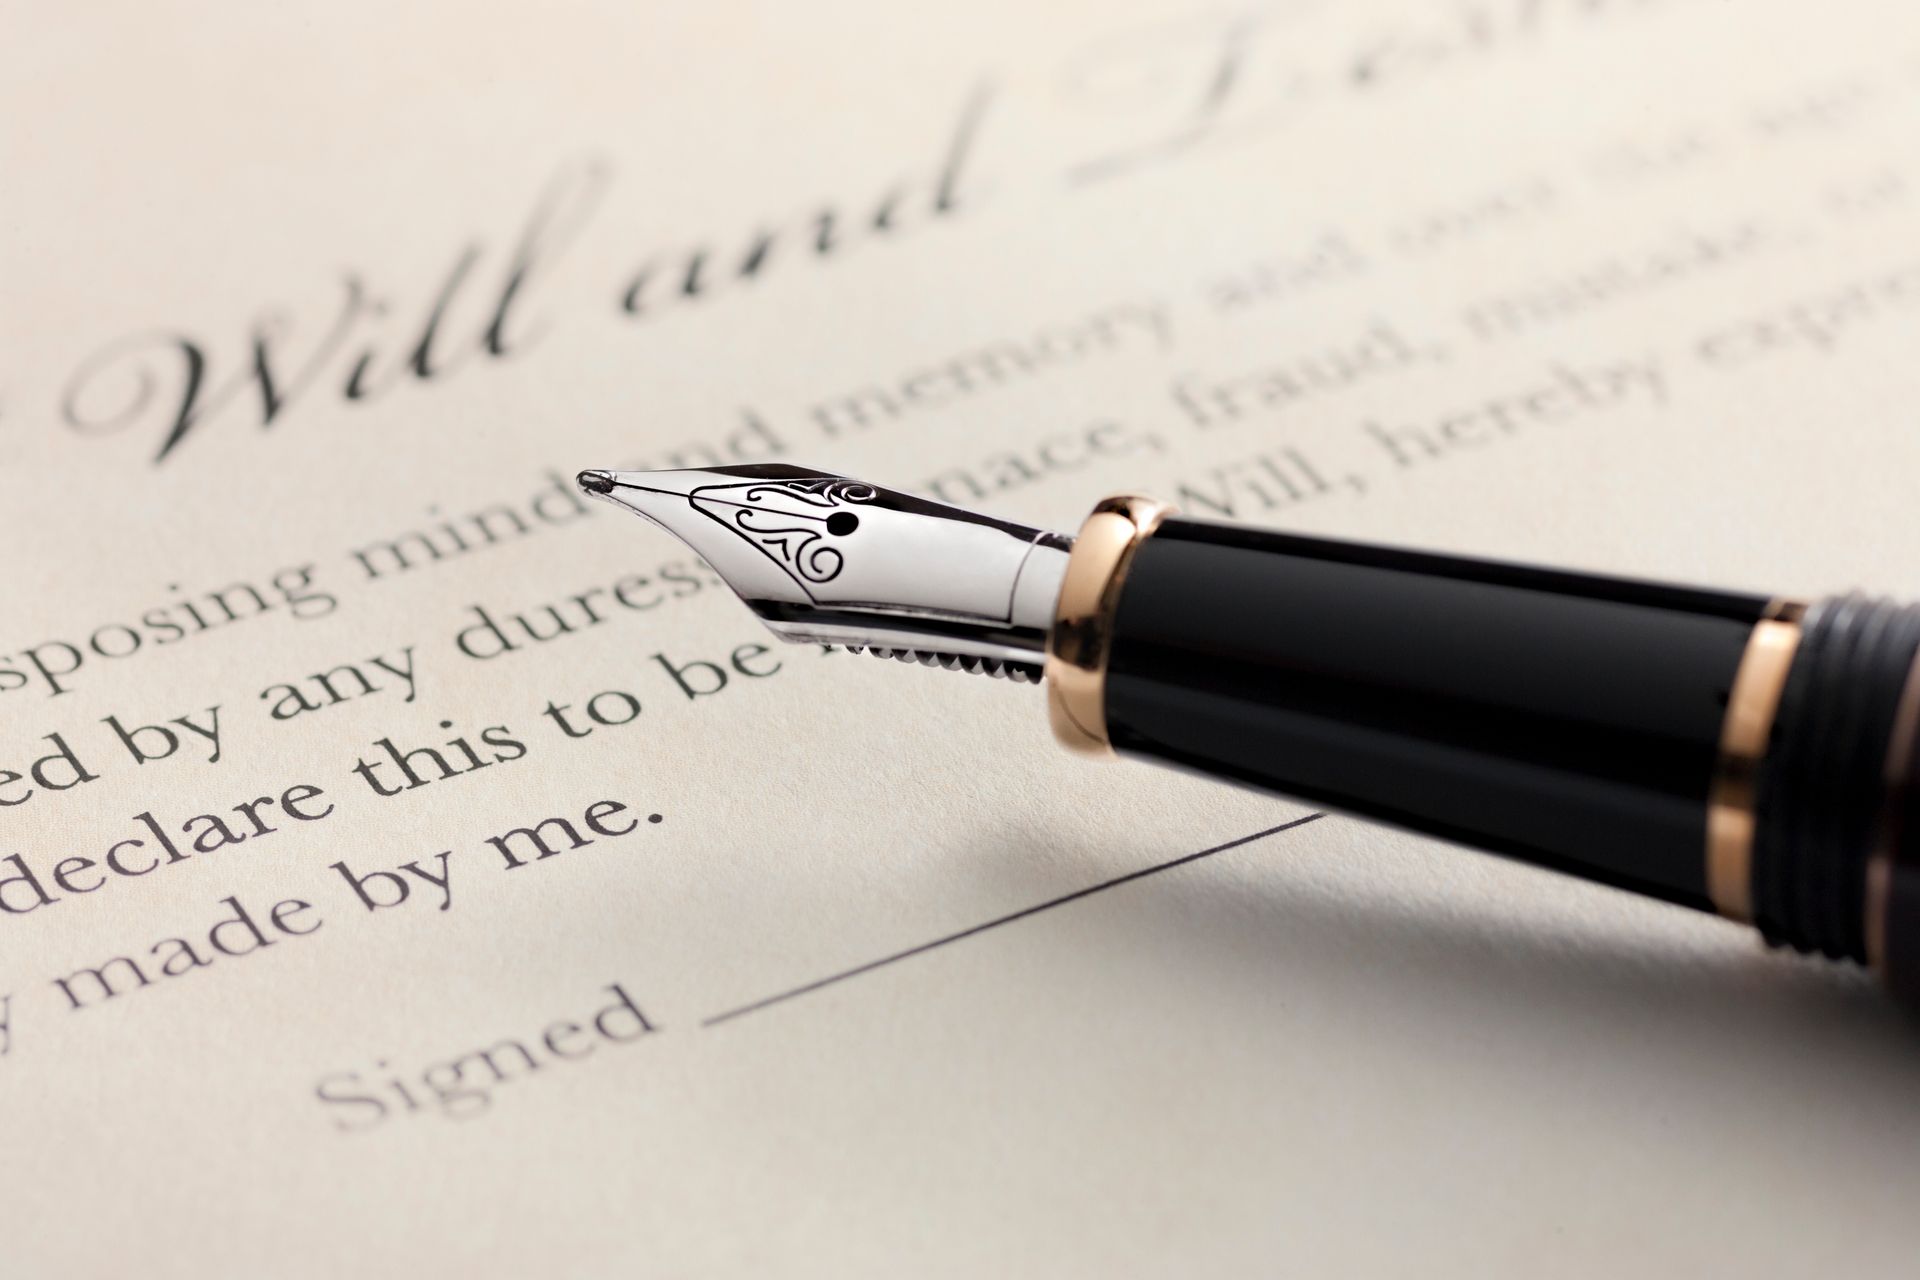 A fountain pen is sitting on top of a will and testament.